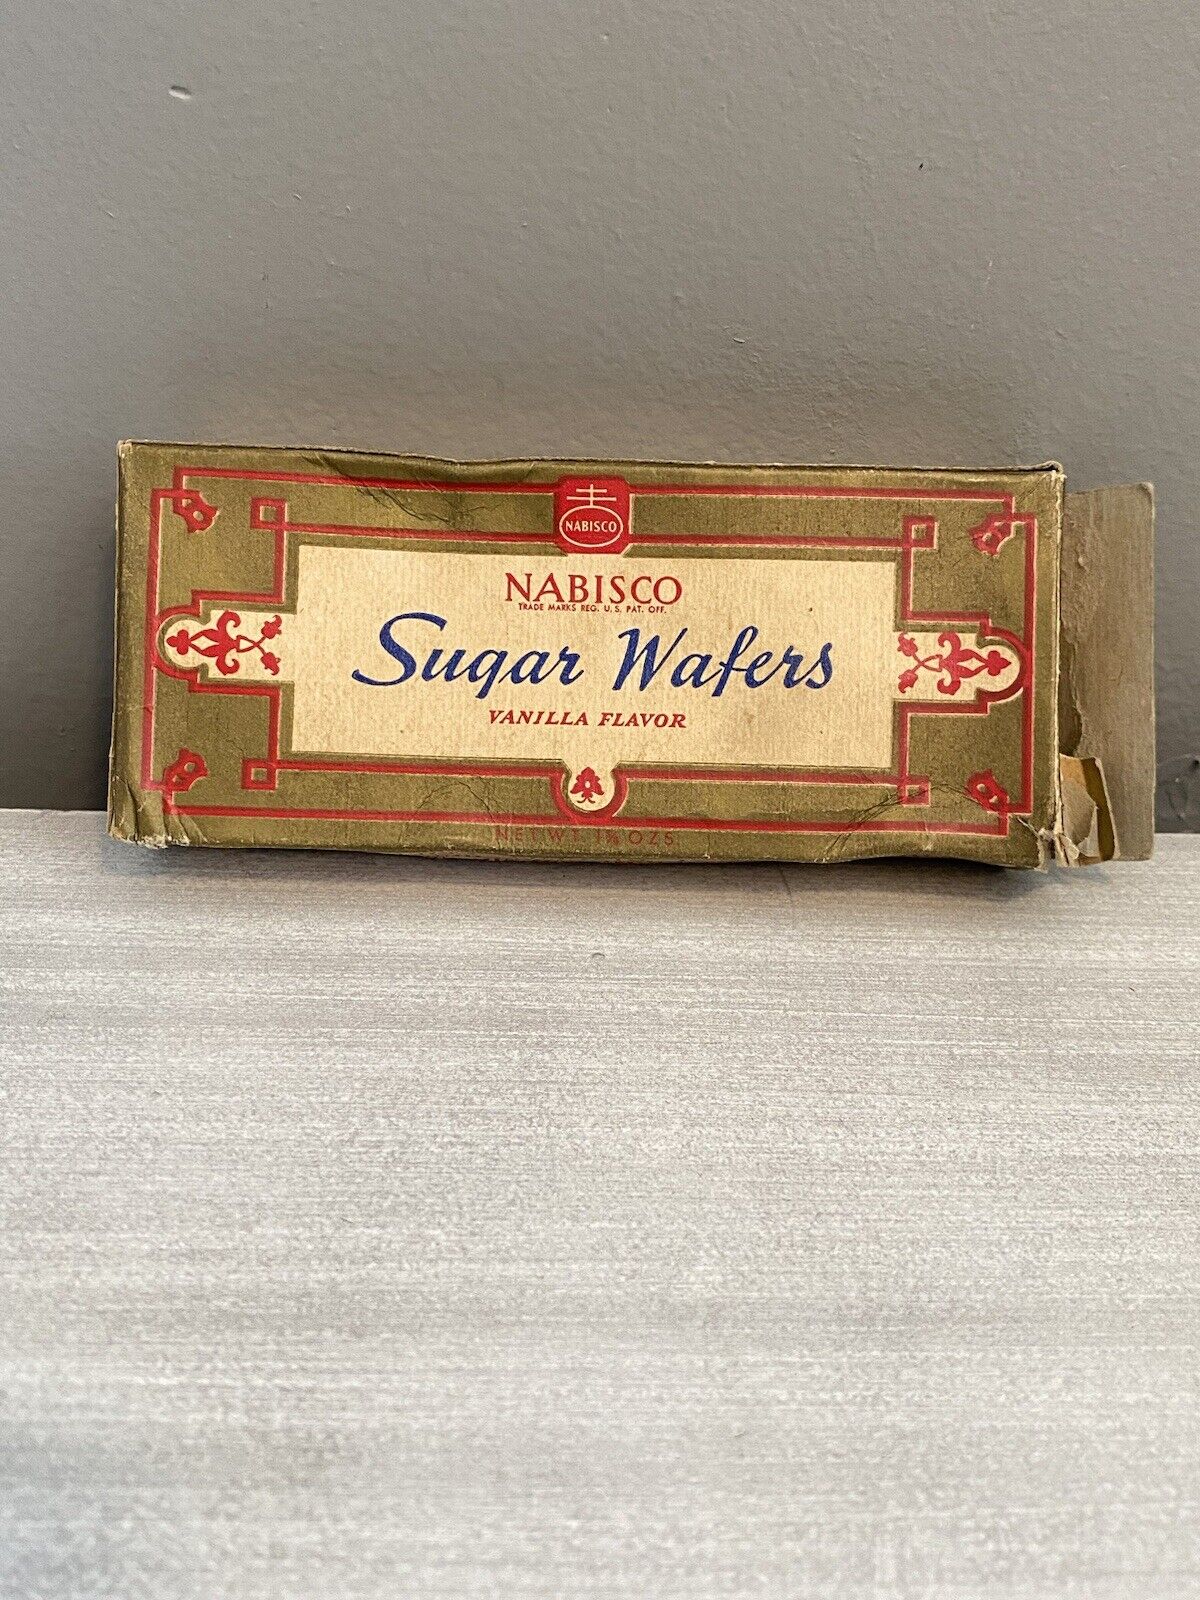 VTG NABISCO Sugar Wafers Vanilla National Biscuit Co Made In USA Empty Box